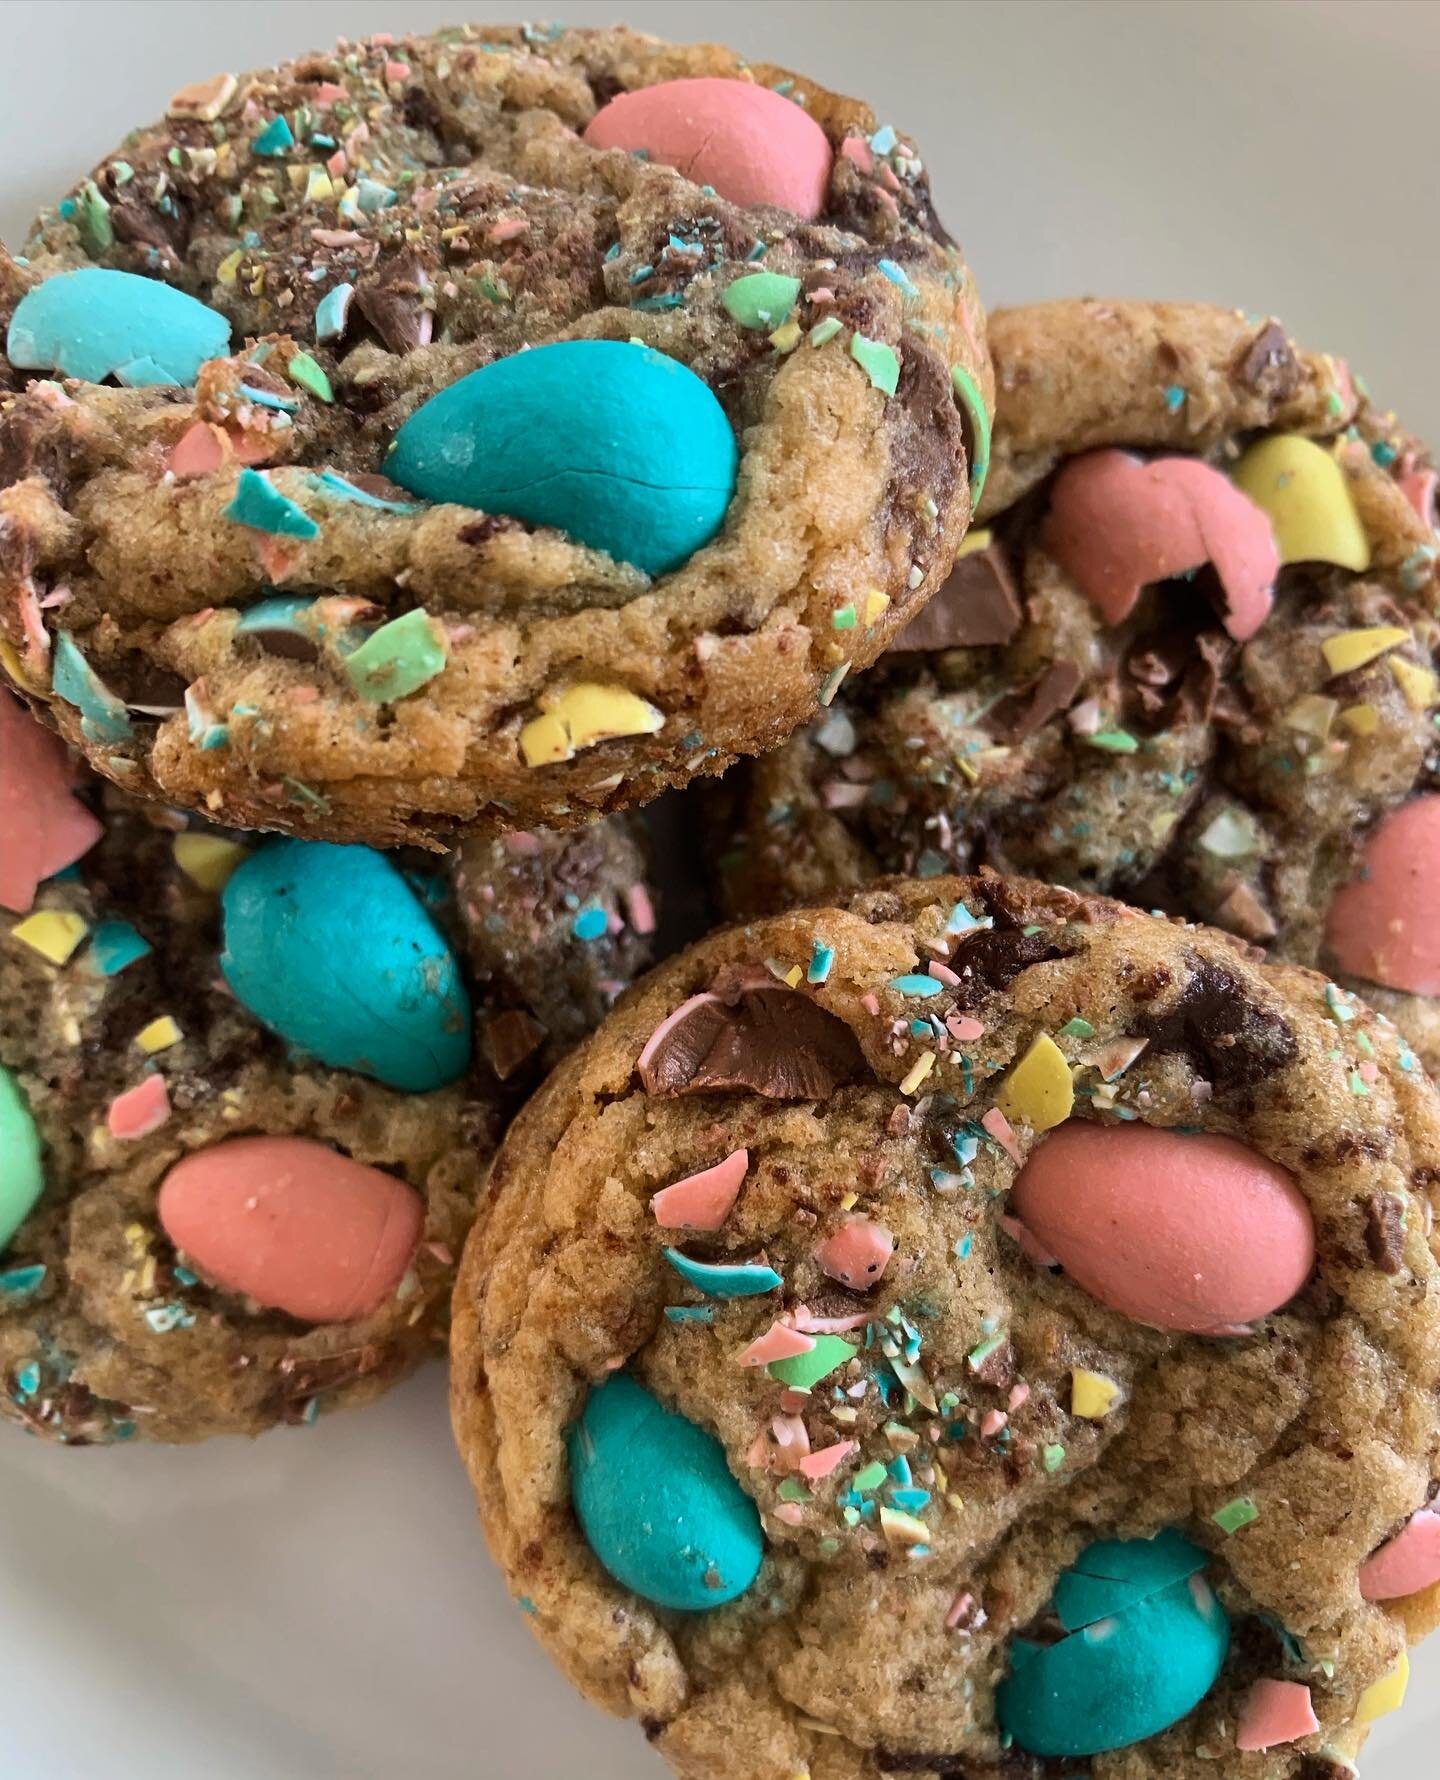 HAPPY EASTER! 🐣 
💛 We are so appreciative of your support this Easter season and hope that all of our amazing customers are enjoying their treats. 
⭐️ If you&rsquo;re still looking for a treat, come see us TODAY at 157 Main St Unionville.